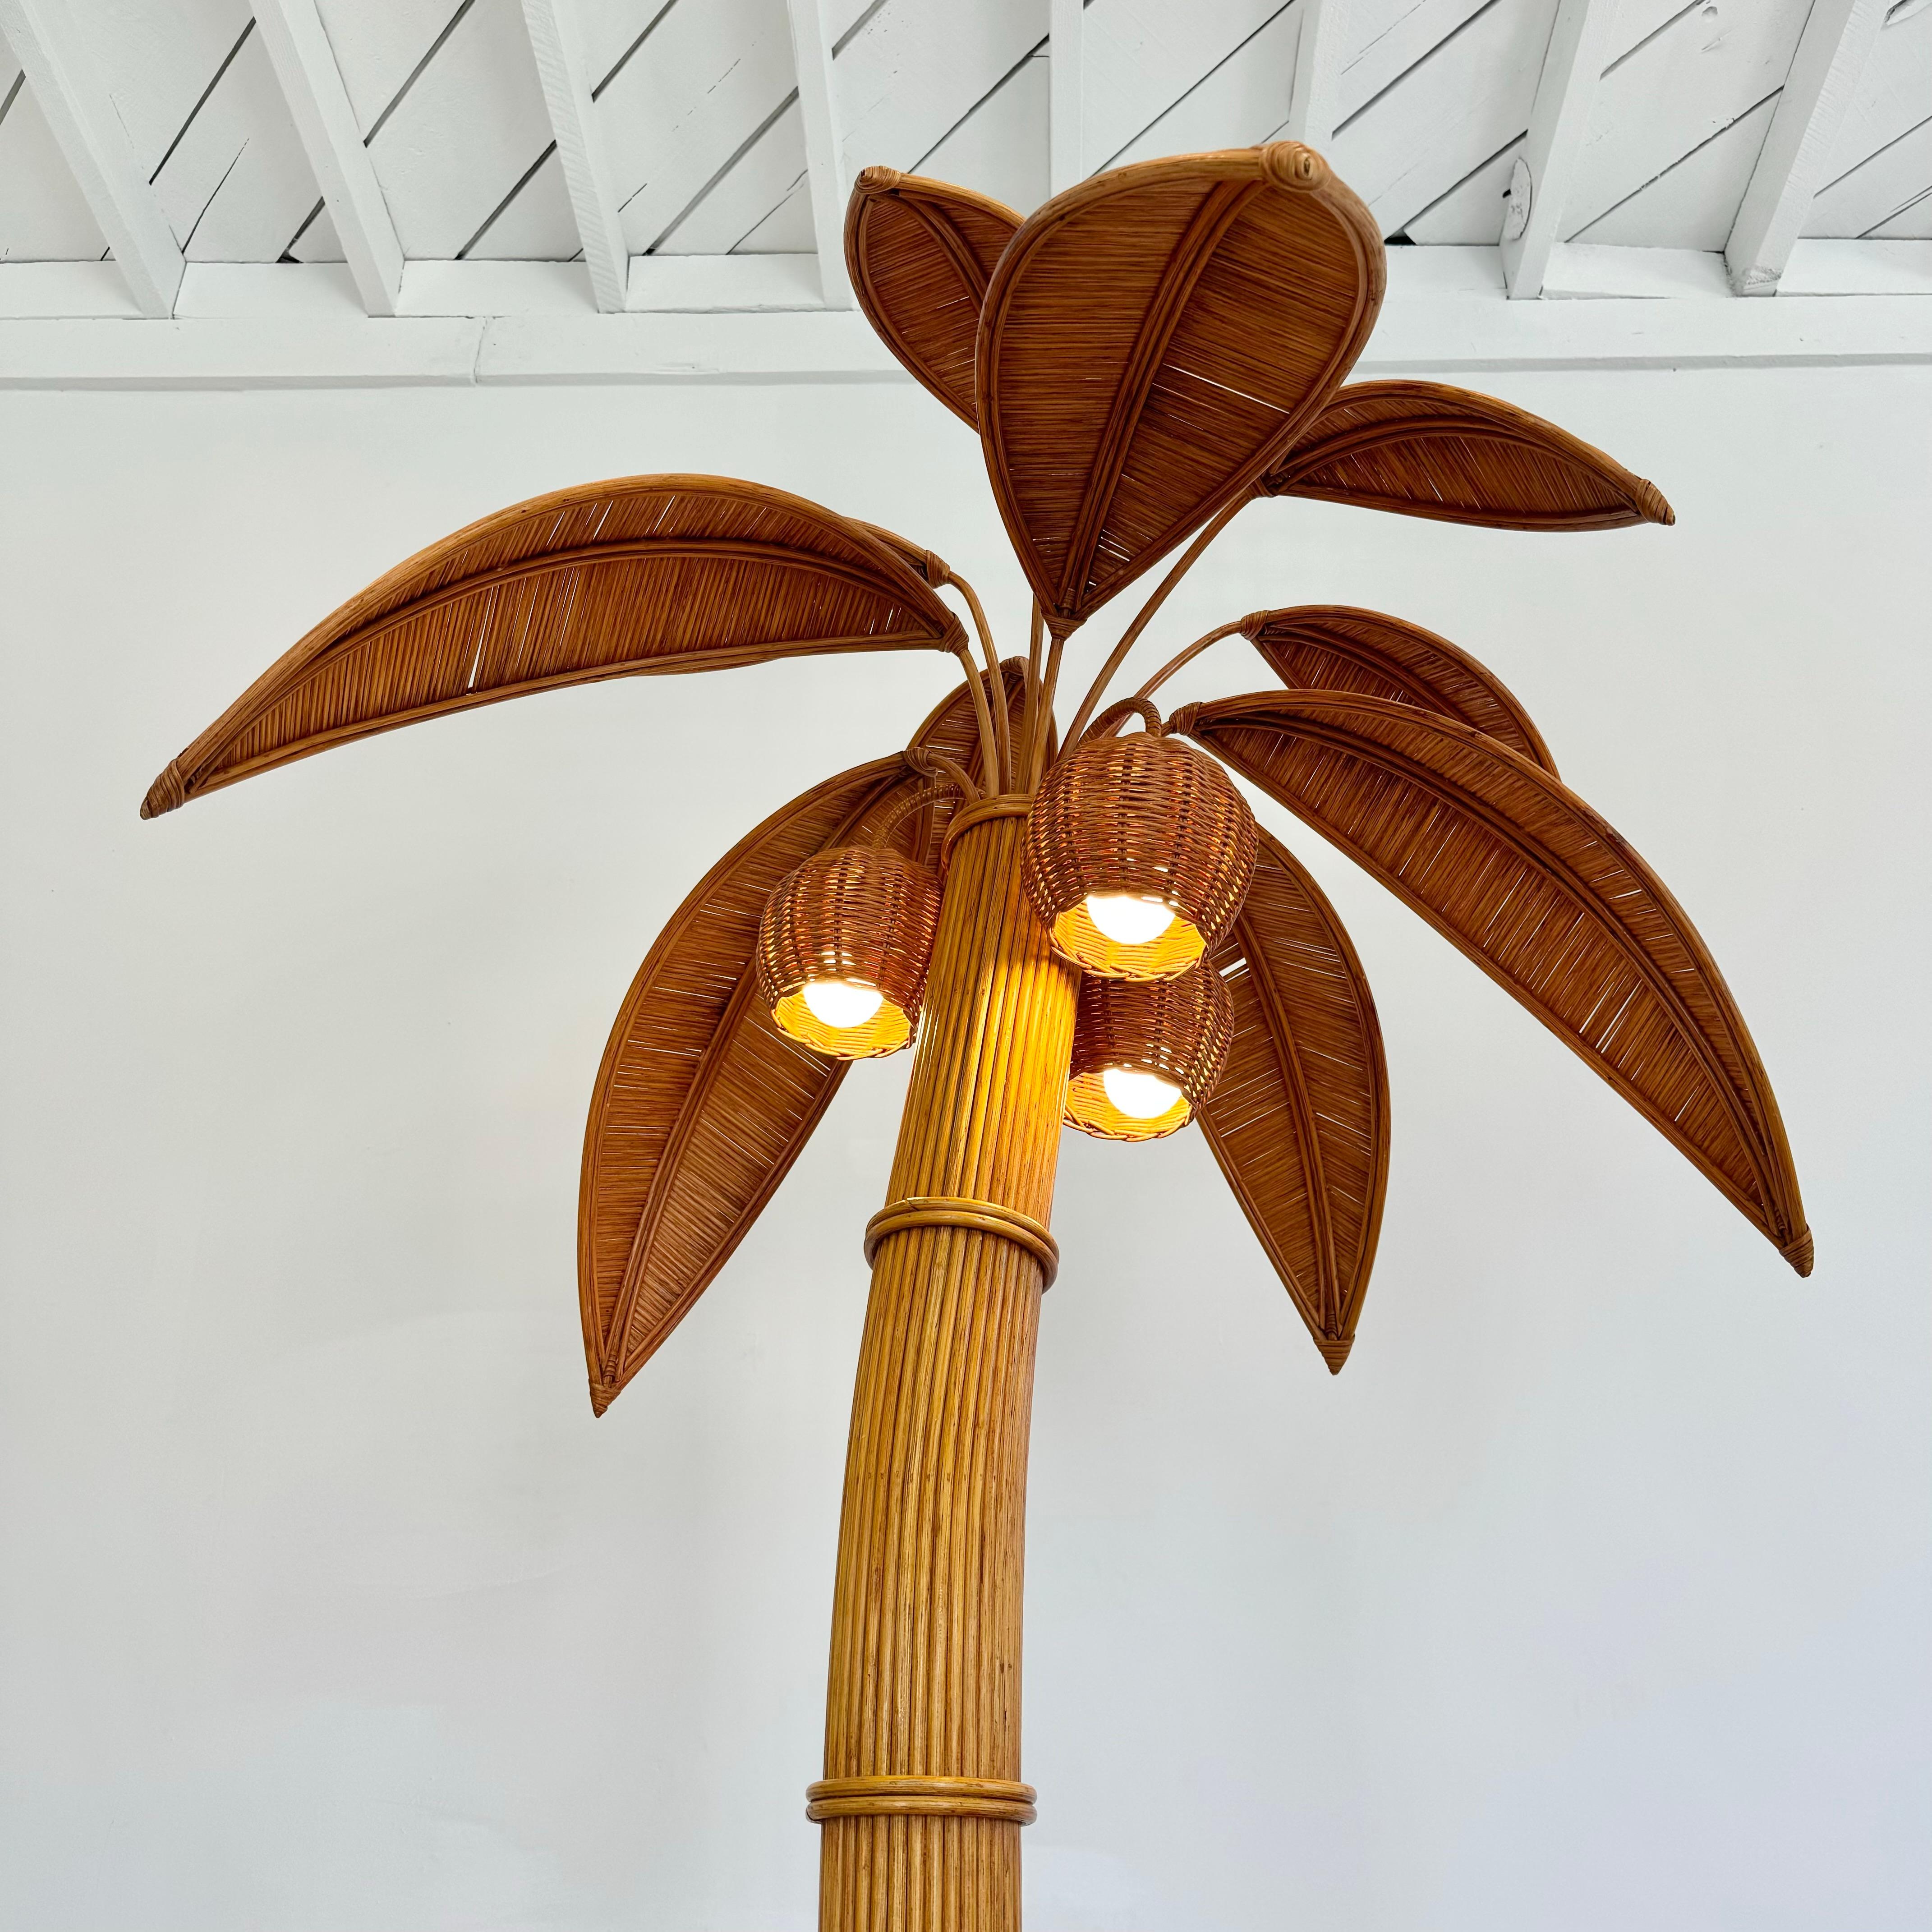 Rattan and Wicker Palm Tree Floor Lamp, 1970s United States For Sale 1